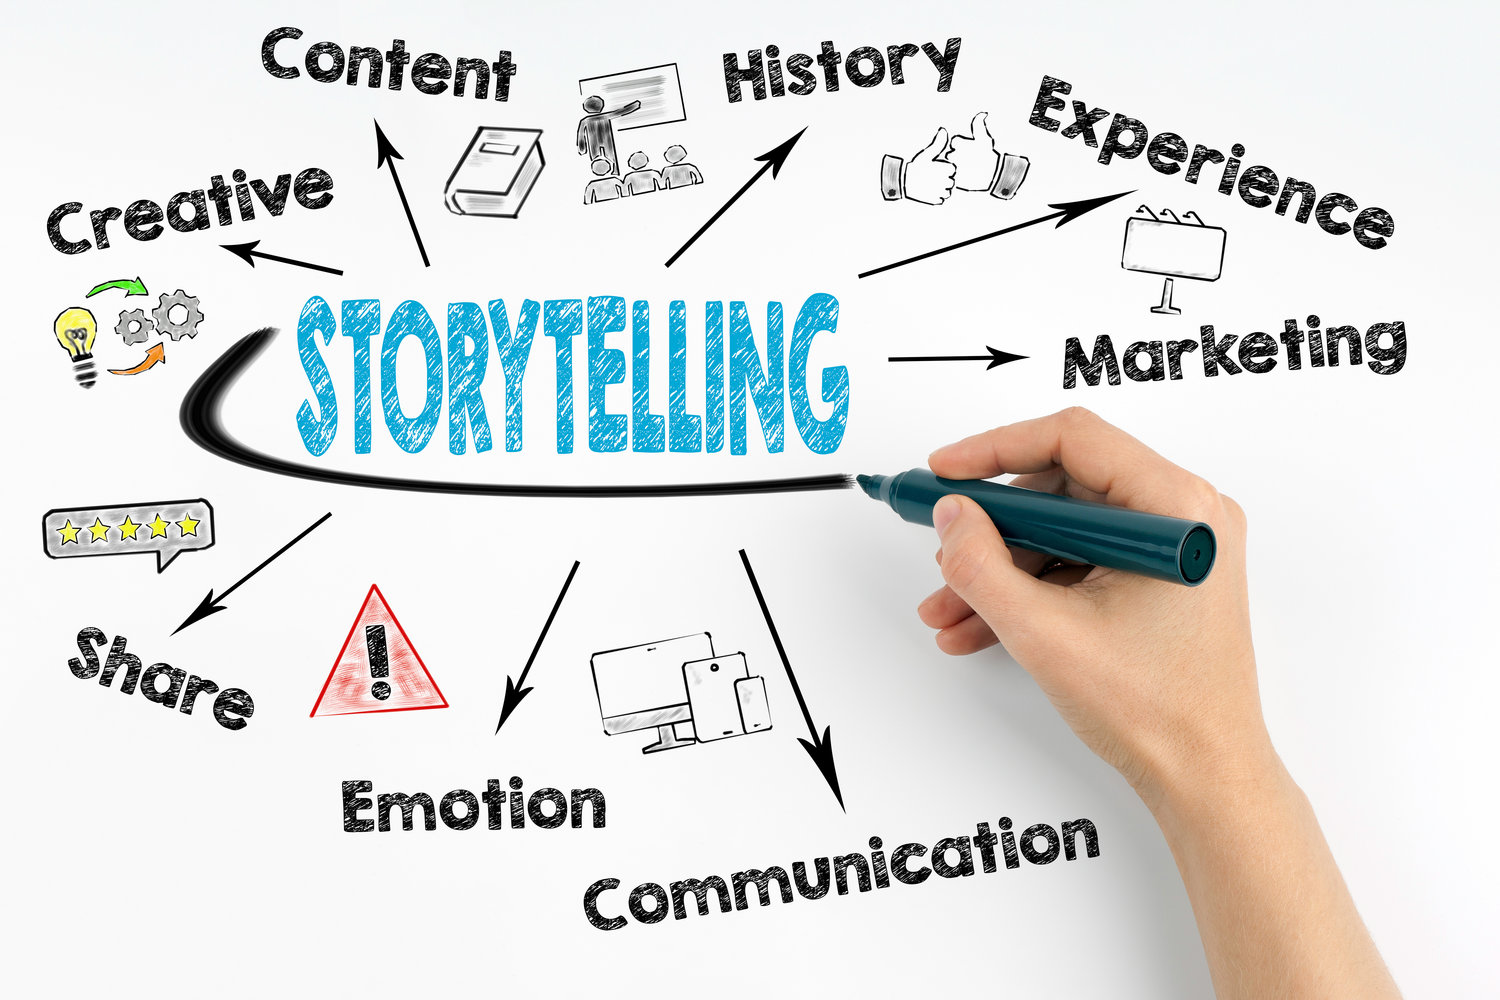 Storytelling, it isn't what you think on storytelling for business